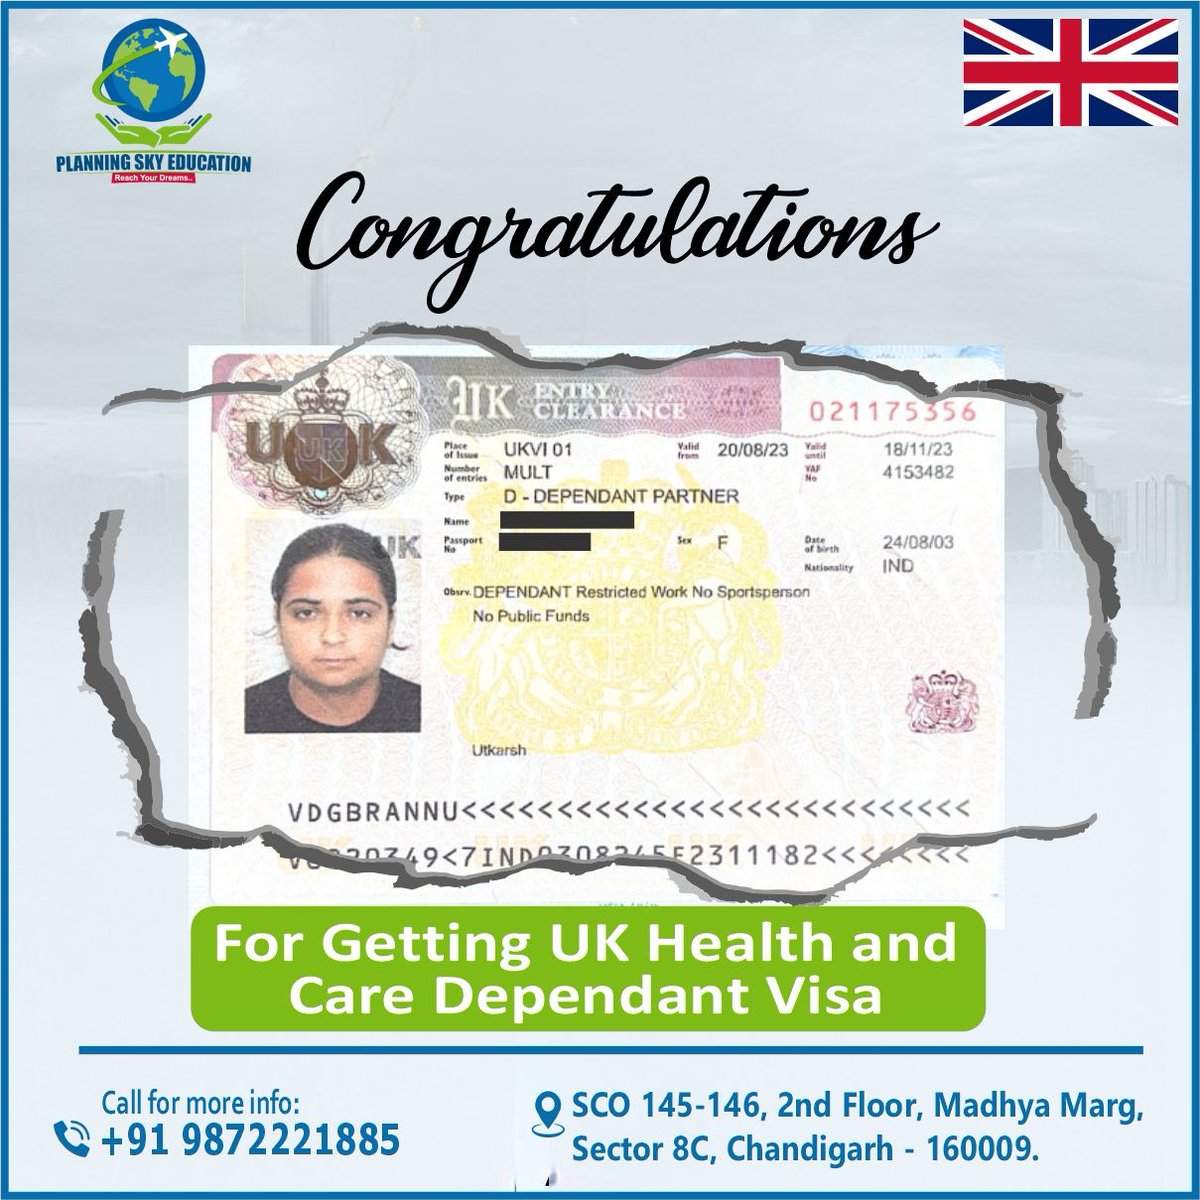 Congratulations on obtaining your UK Health and Care Dependant Visa! 
🎊 Let us guide you through every step of your exciting adventure.

#PlanningSkyEducation #UKVisa #HealthAndCareDependantVisa #Congratulations #NewBeginnings #StartYourJourney #ExploreTheUK